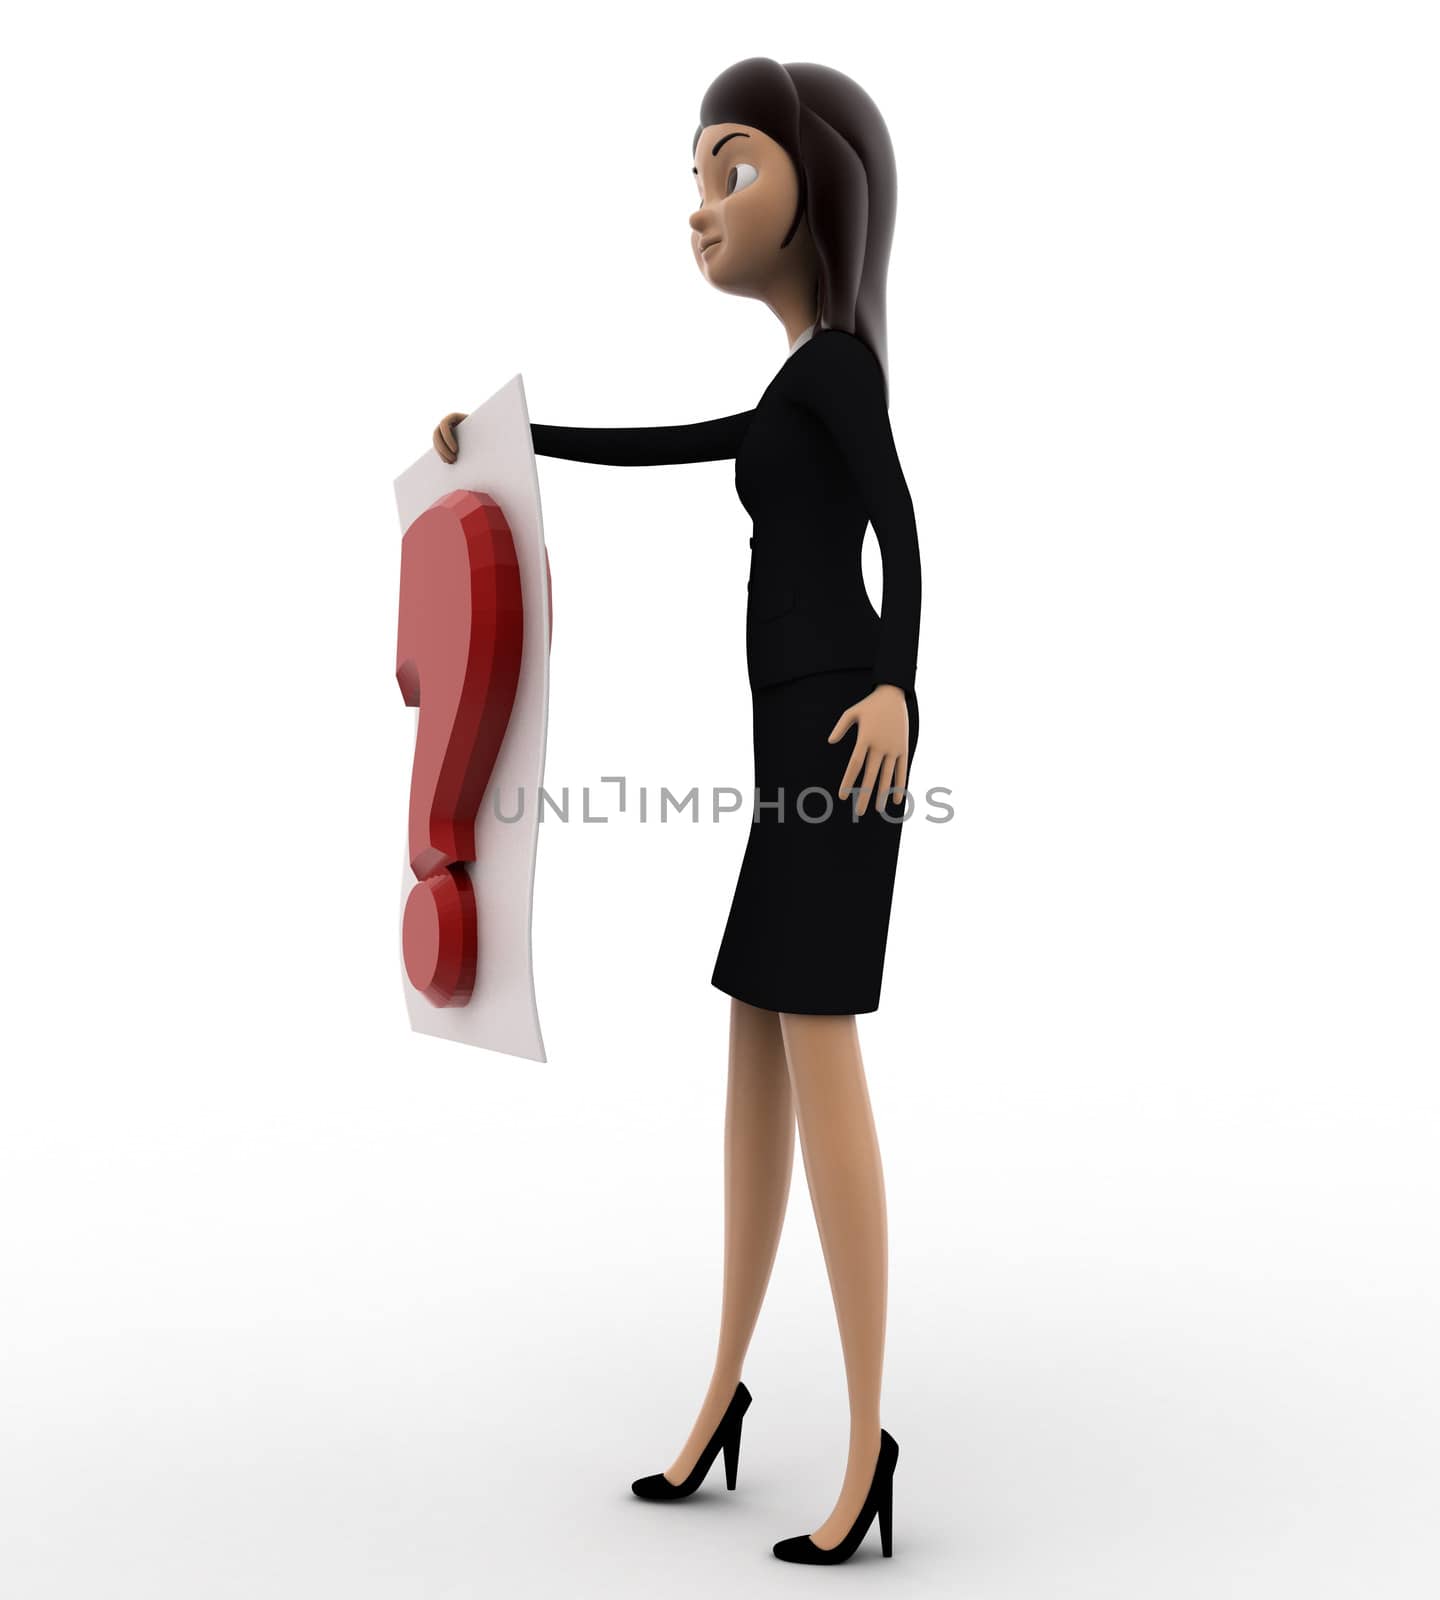 3d woman with question mark board concept on white background, side angle view